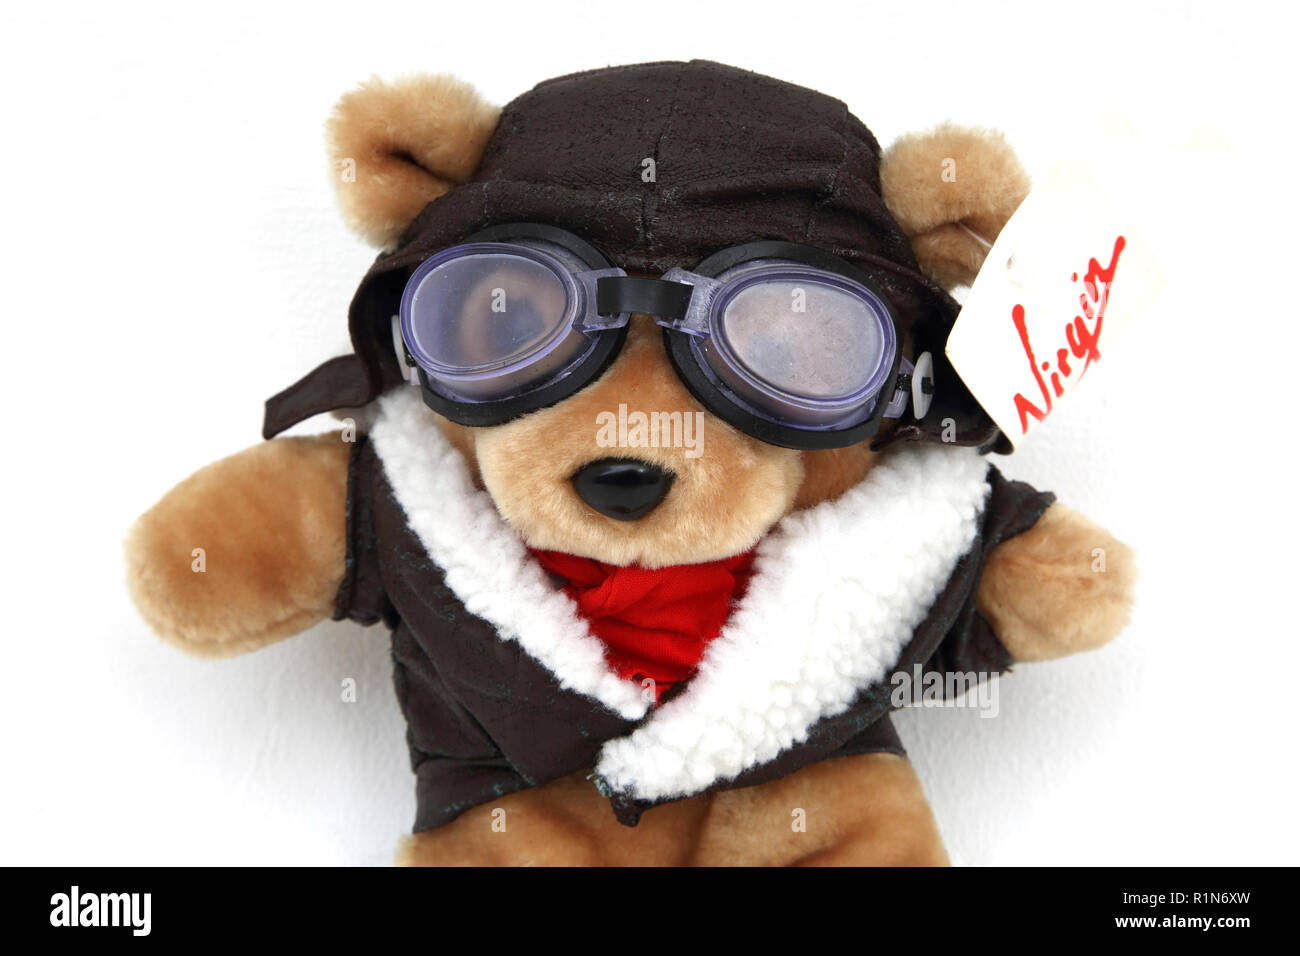 Promotional Teddy Bear from Virgin Airlines Stock Photo